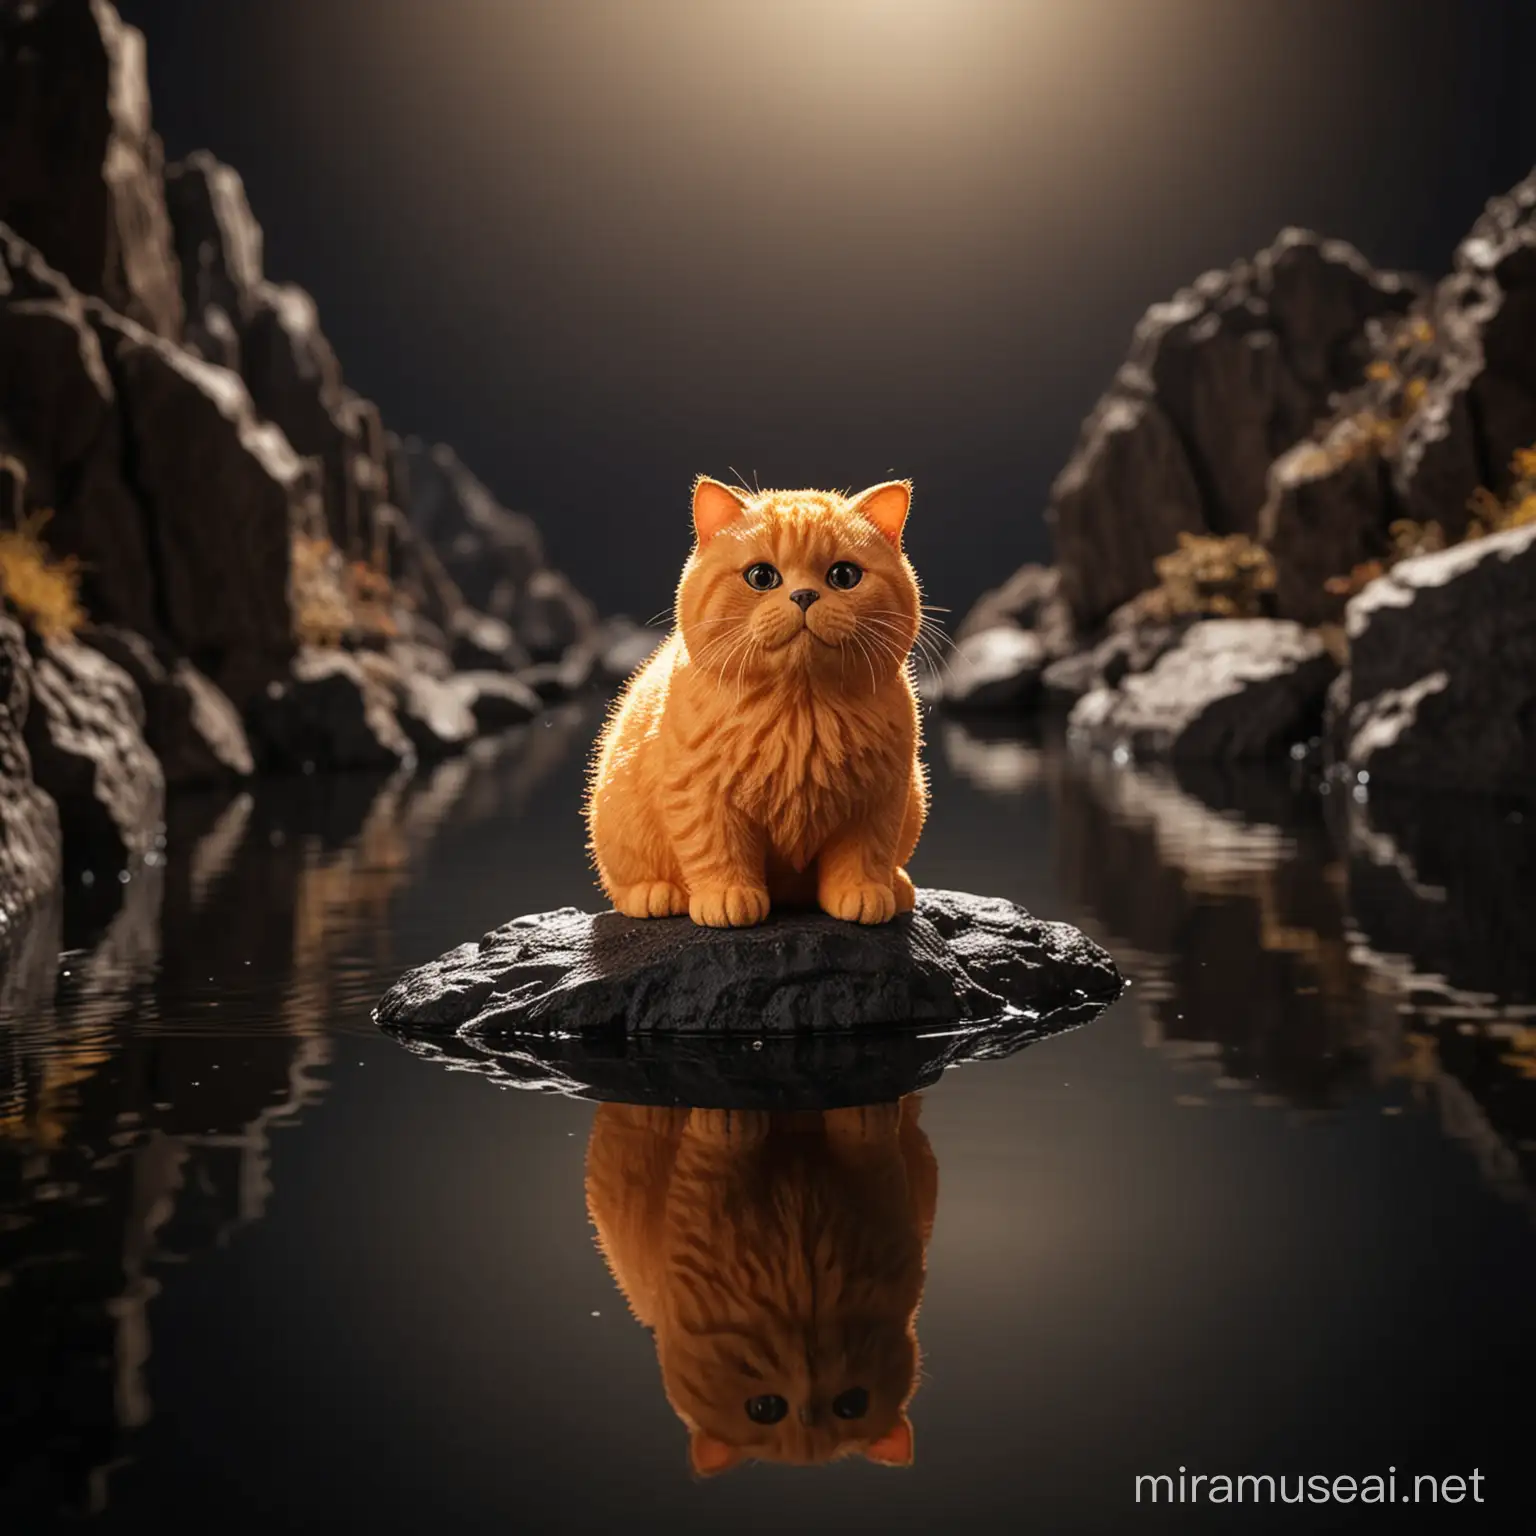 Adorable Orange Chubby Cat Miniature Perched on Rock Amidst Black Waters with Reflection Effect